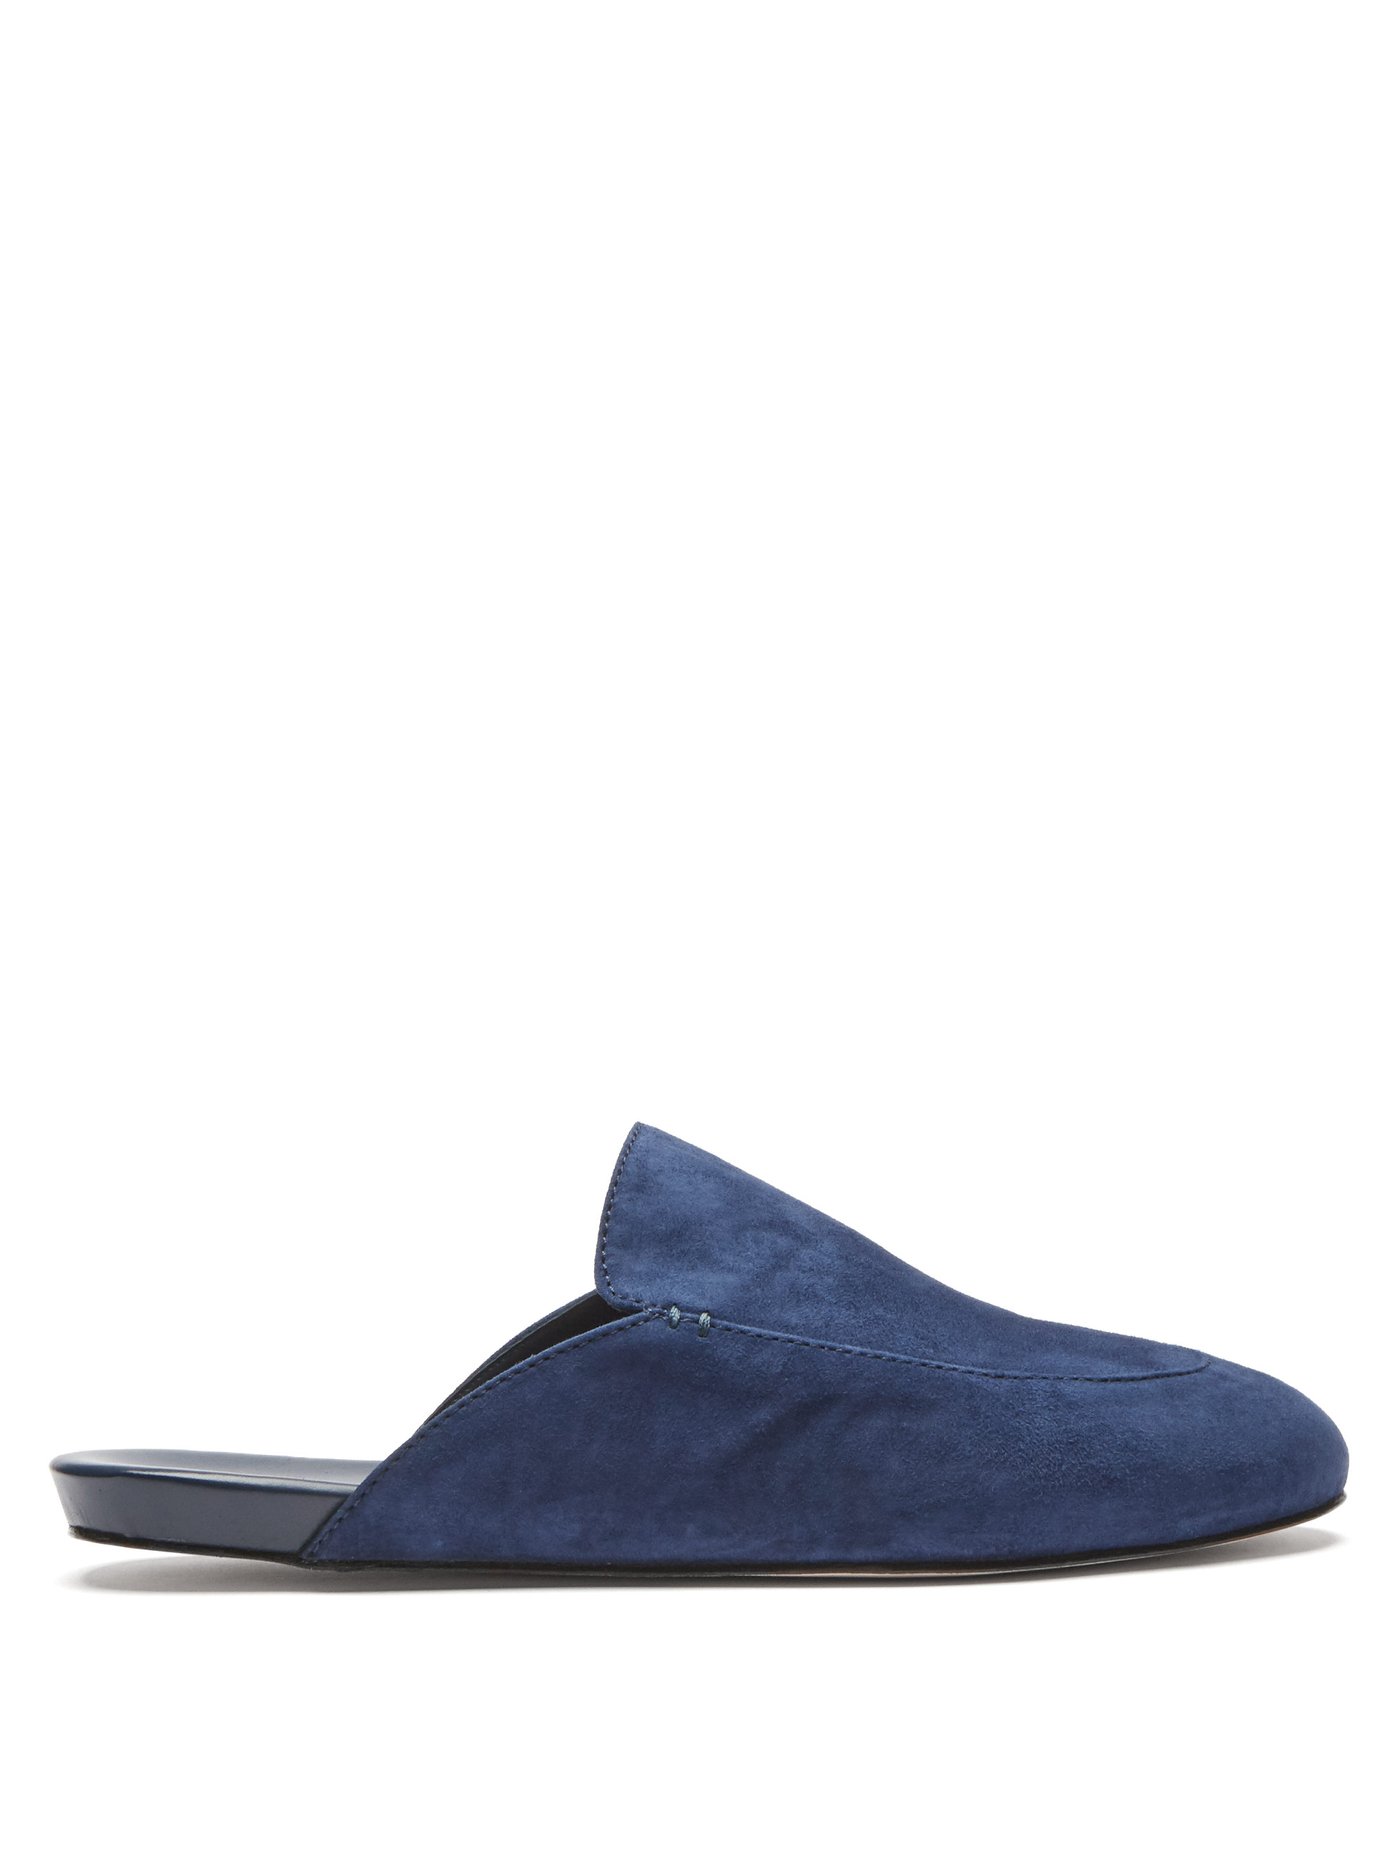 suede leather slippers